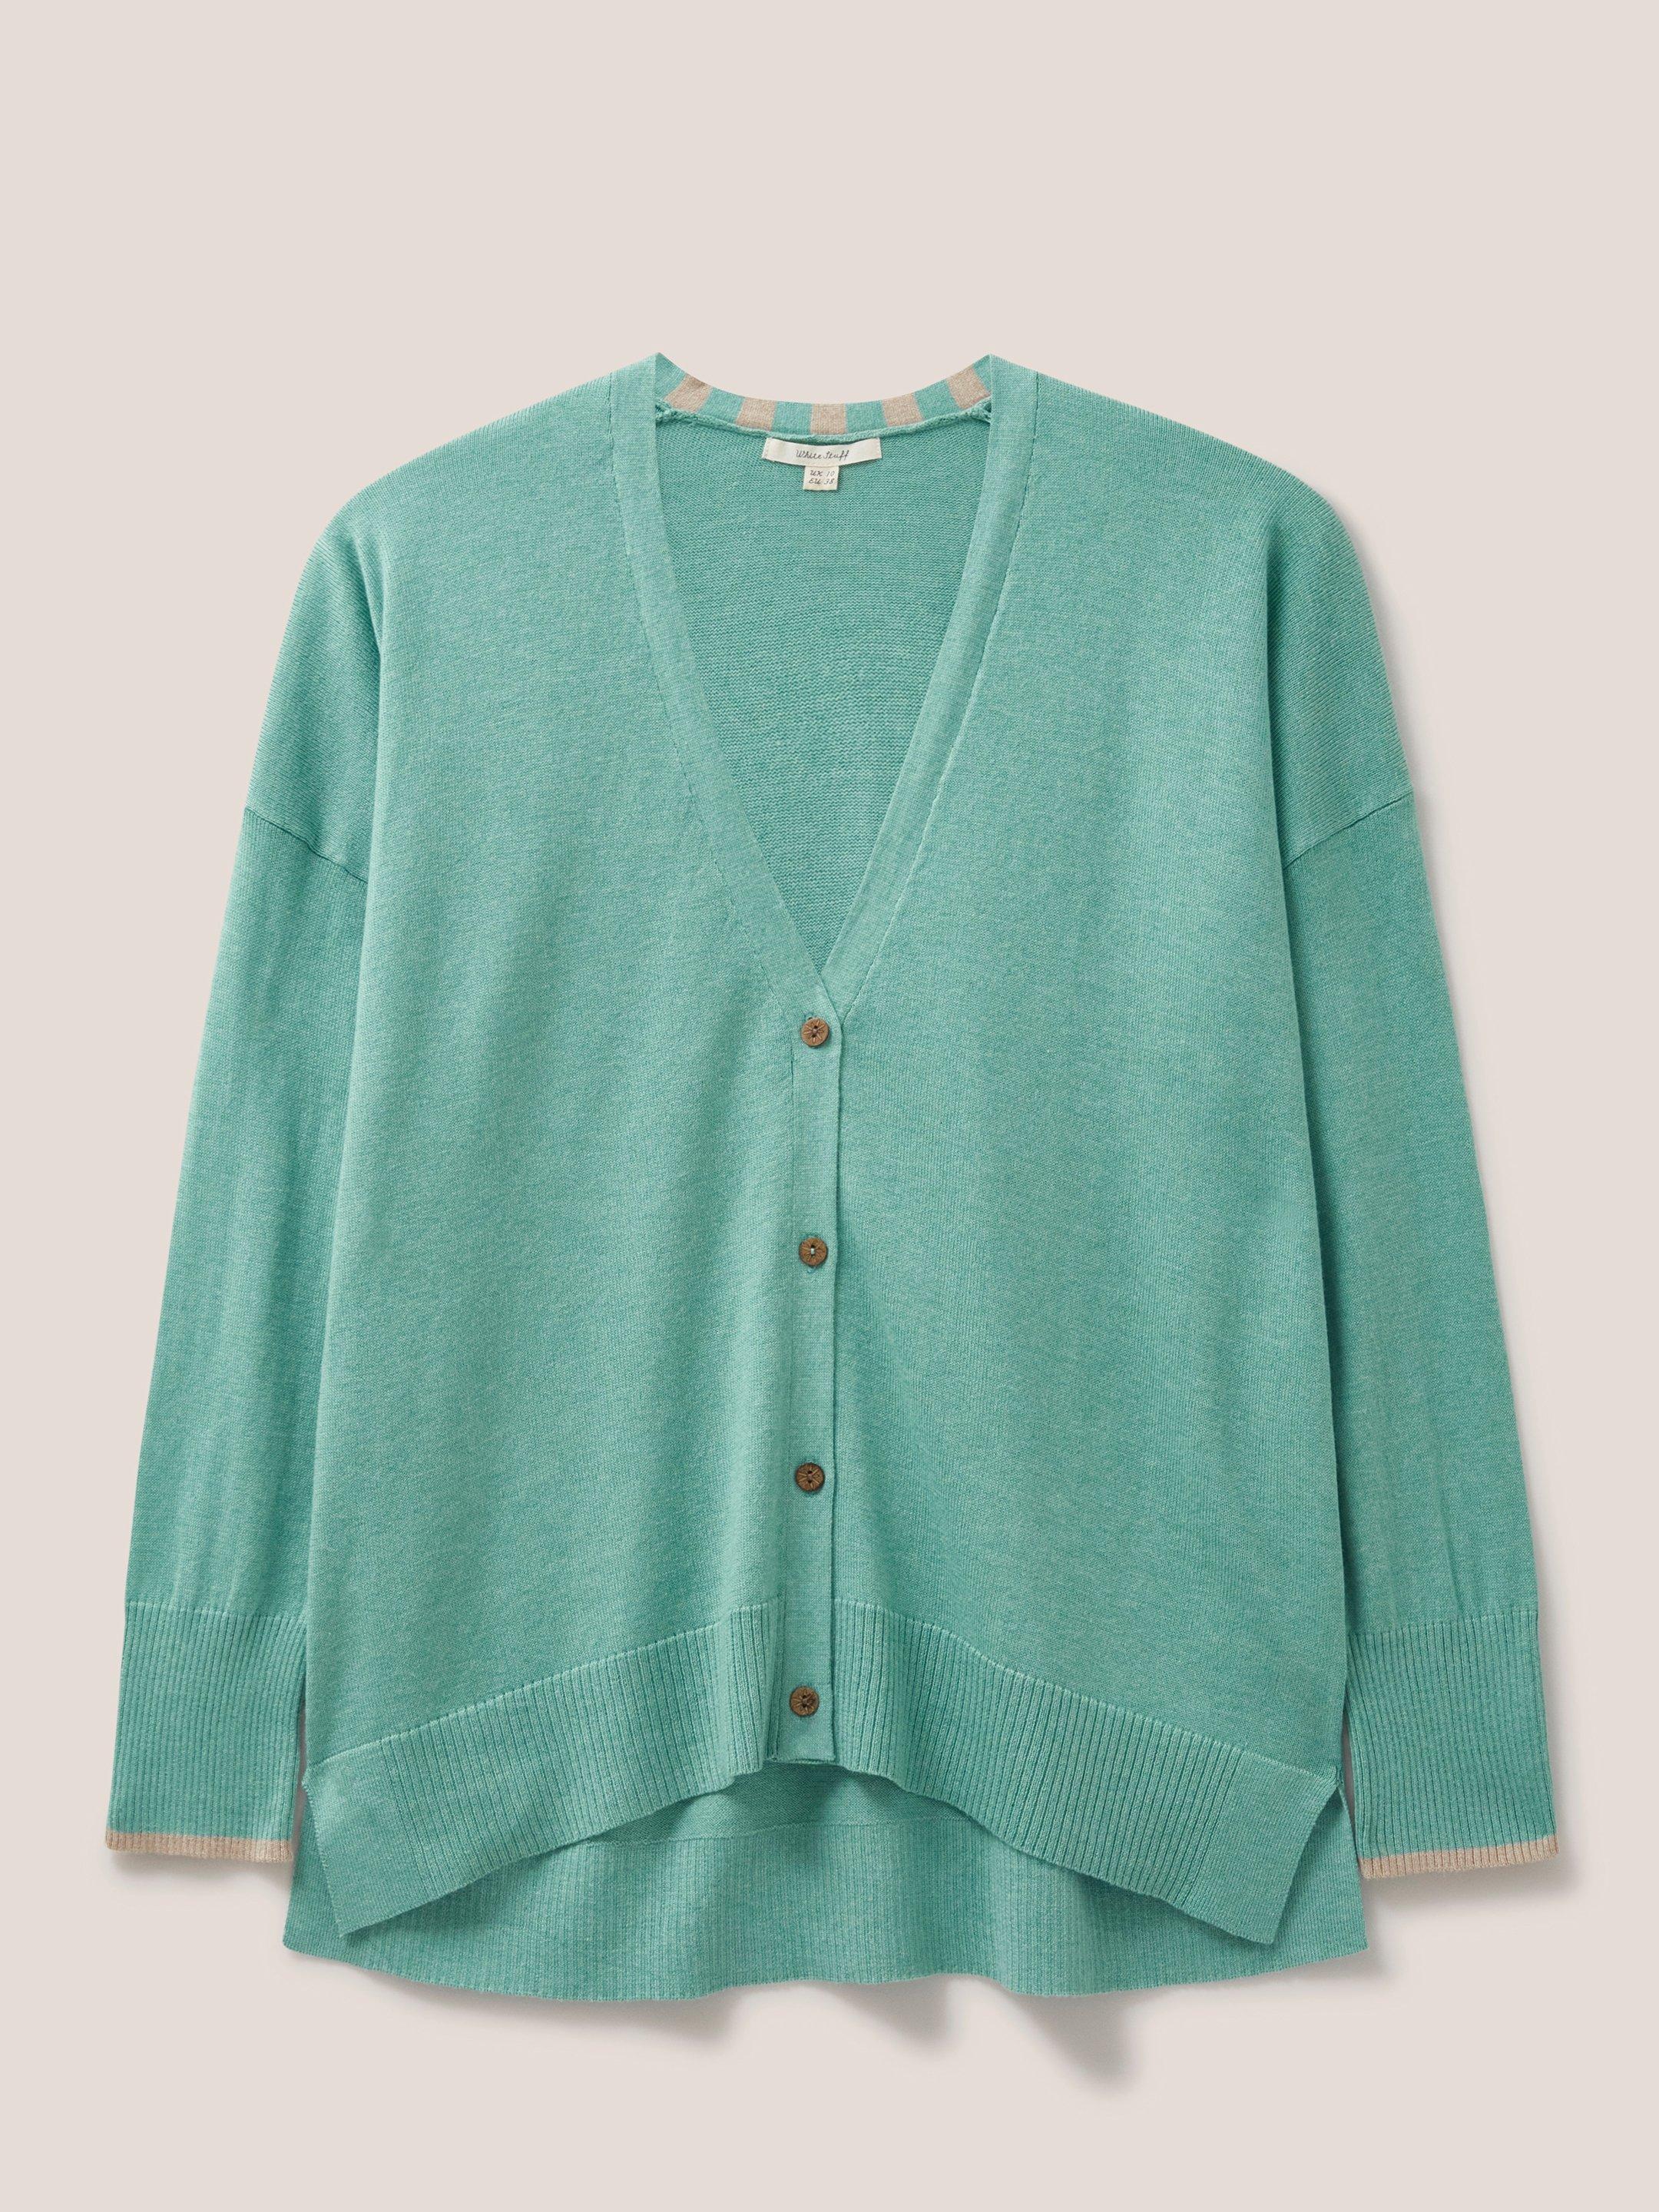 ONYA CARDI in MID TEAL - FLAT FRONT